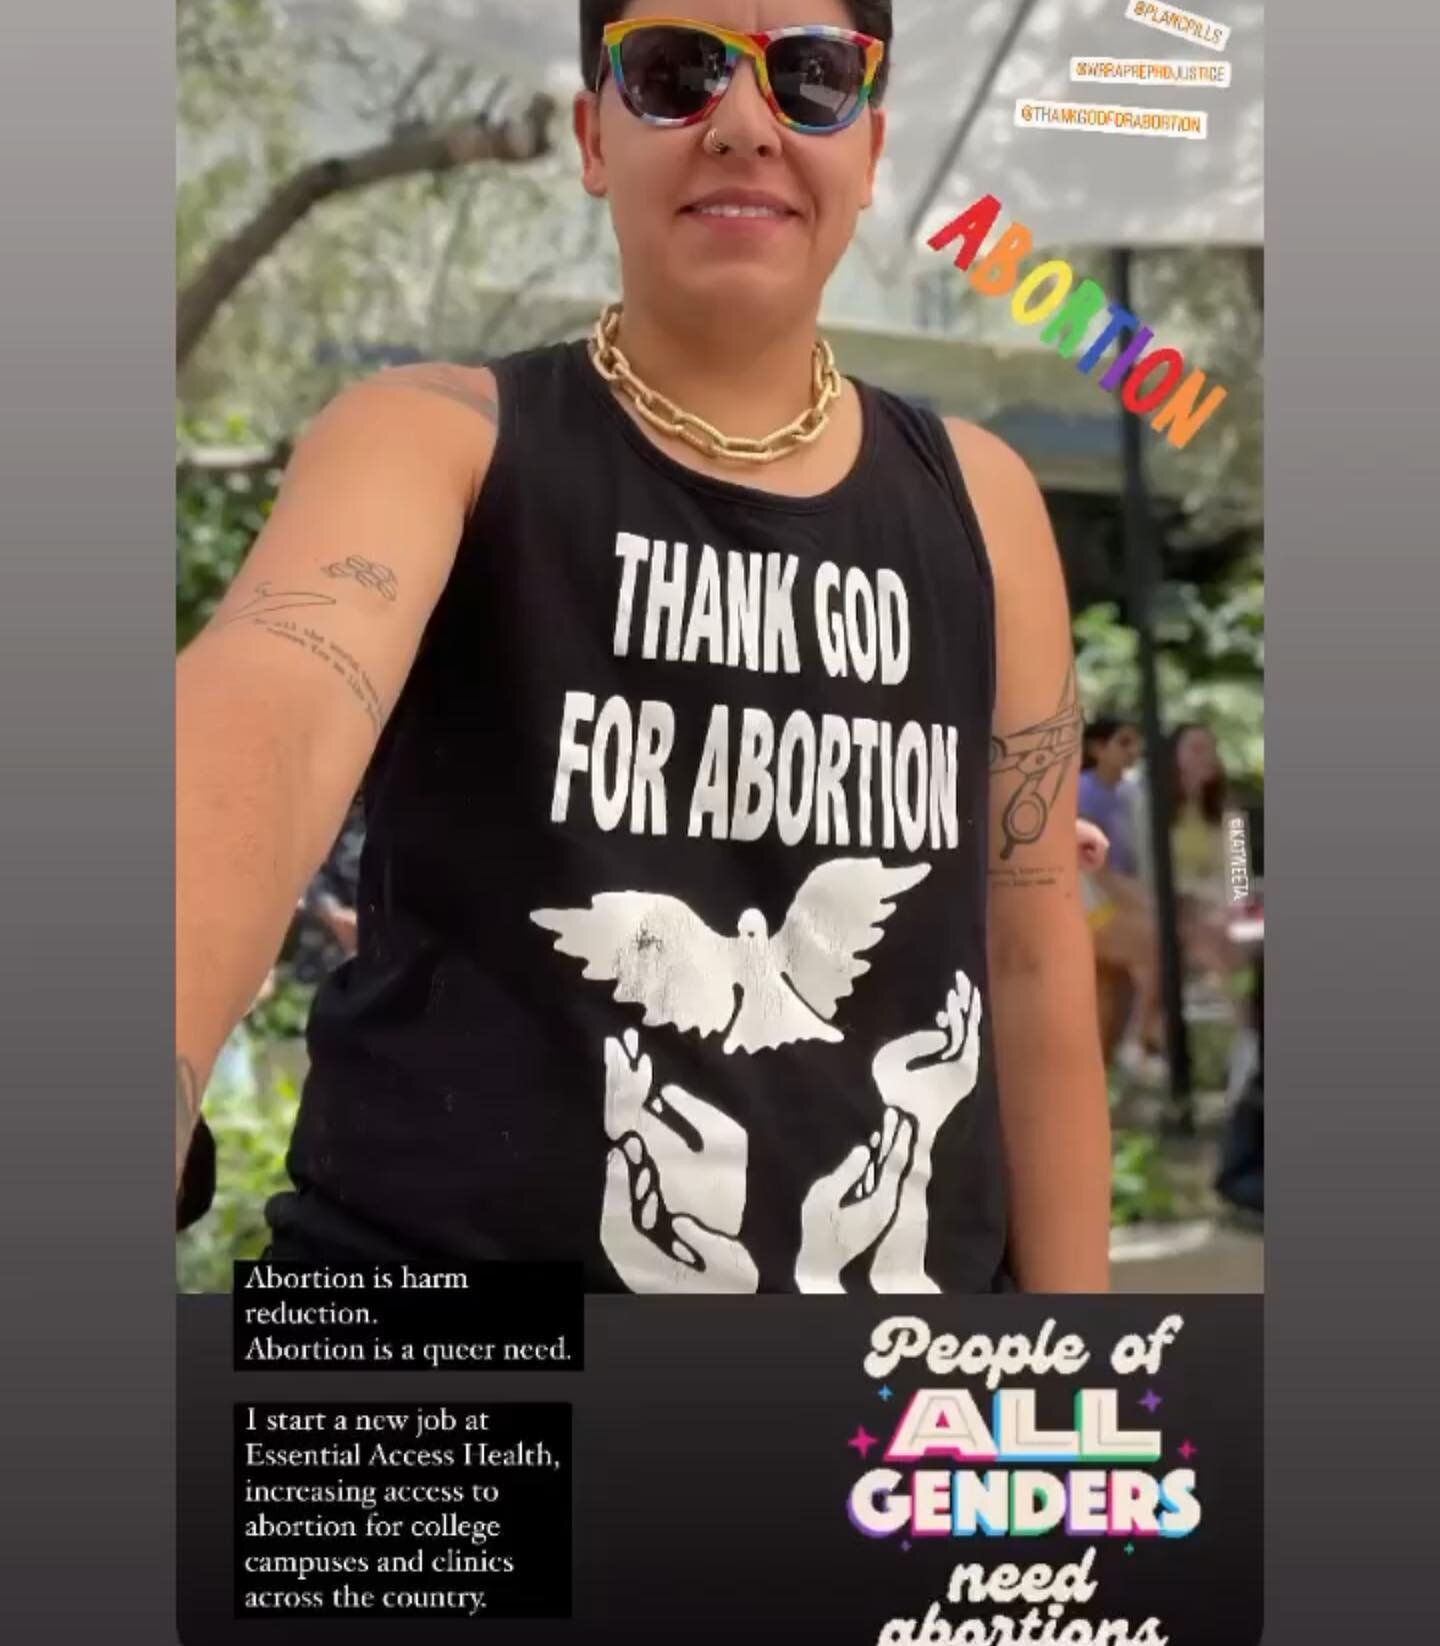 ABORTION IS HARM REDUCTION 🌈ABORTION IS A QUEER NEED🦄
PEOPLE OF ALL GENDERS NEED ABORTIONS 
💚💚💚💚
Thank you for the loud and proud @marissa0803 ‼️
We are with you 10000%🦄🕊️

Congrats on your new job phew thank you for your service!

#thankgodf